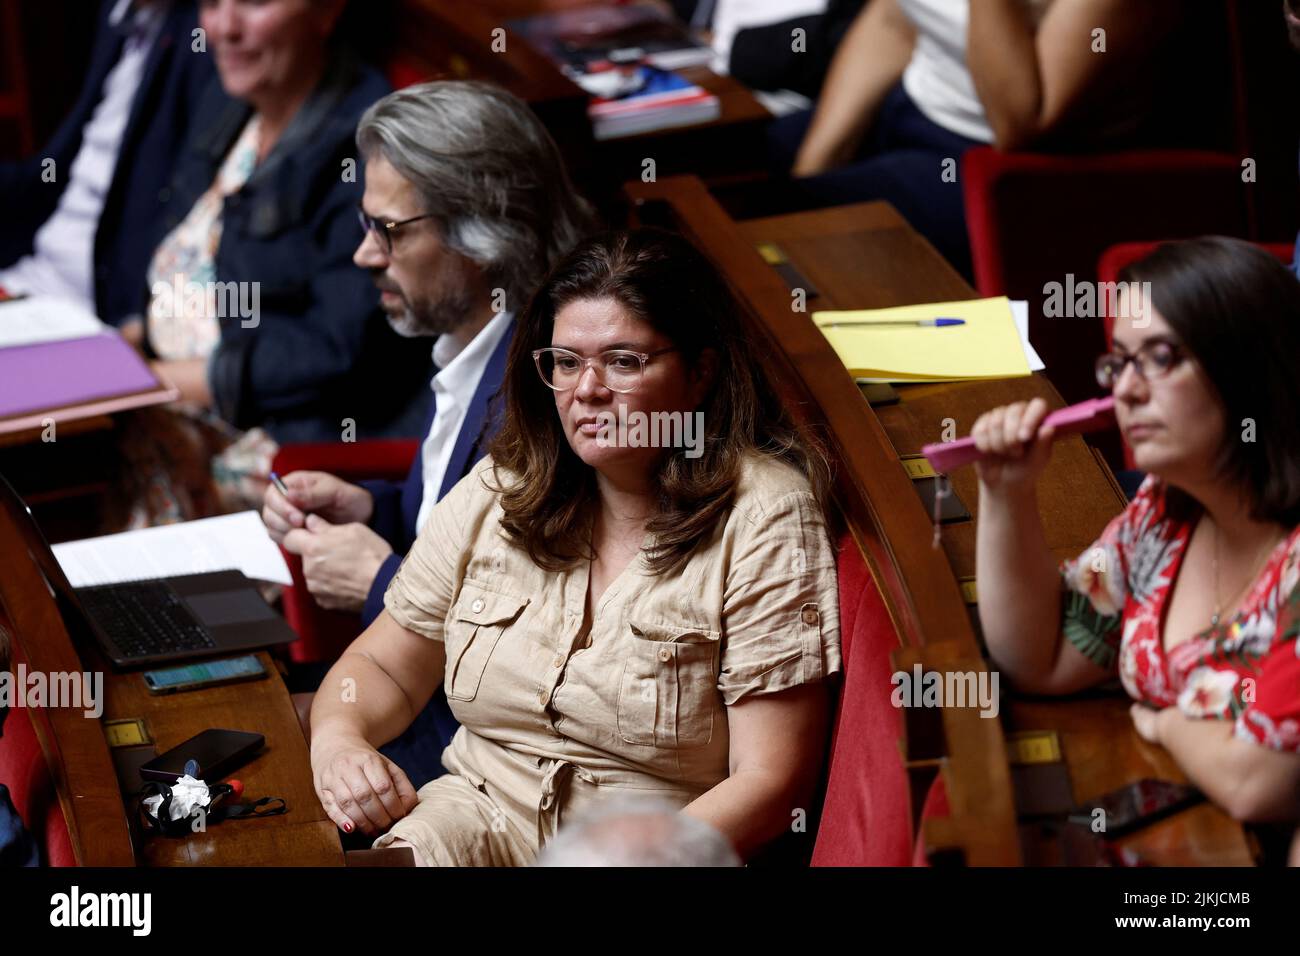 Member of parliament Raquel Garrido of the French far-left opposition party La France Insoumise (France Unbowed) and the left-wing coalition NUPES attends the questions to the government session at the National Assembly in Paris, France, August 2, 2022. REUTERS/Benoit Tessier Stock Photo